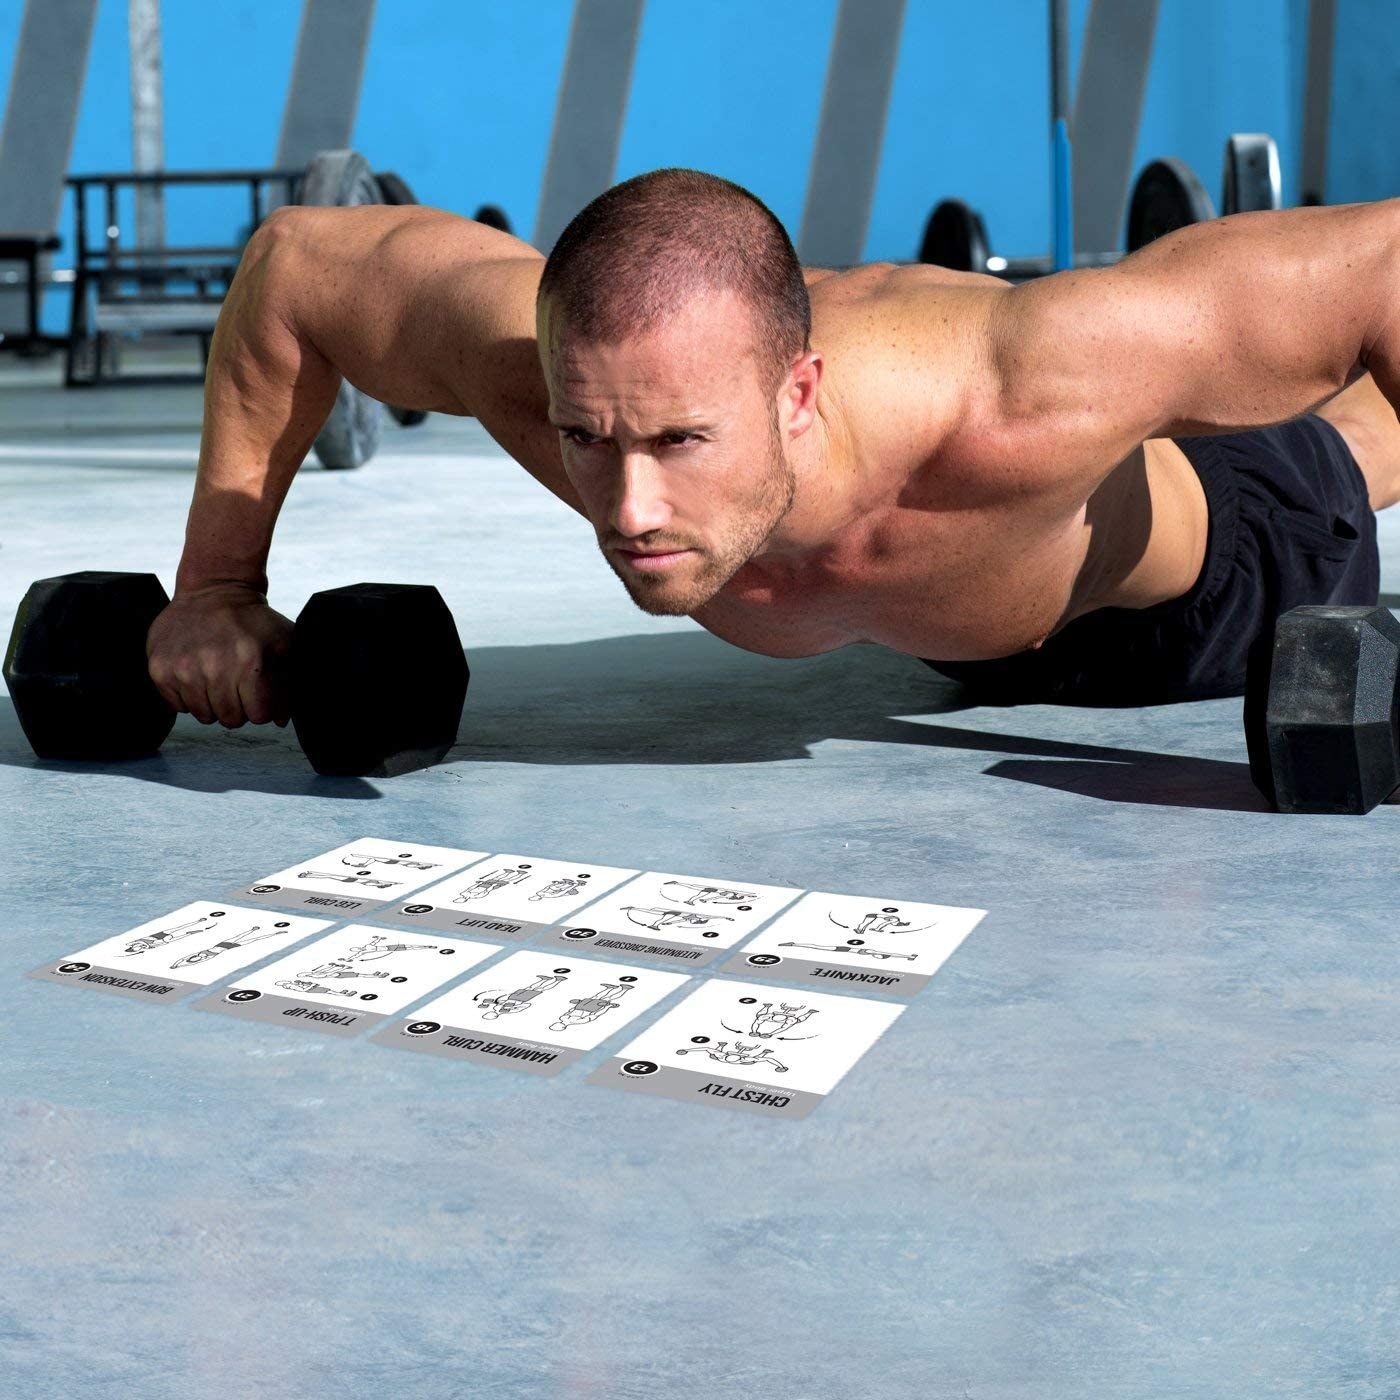 Model goes into push-up position with weights in front of a stack of exercise cards